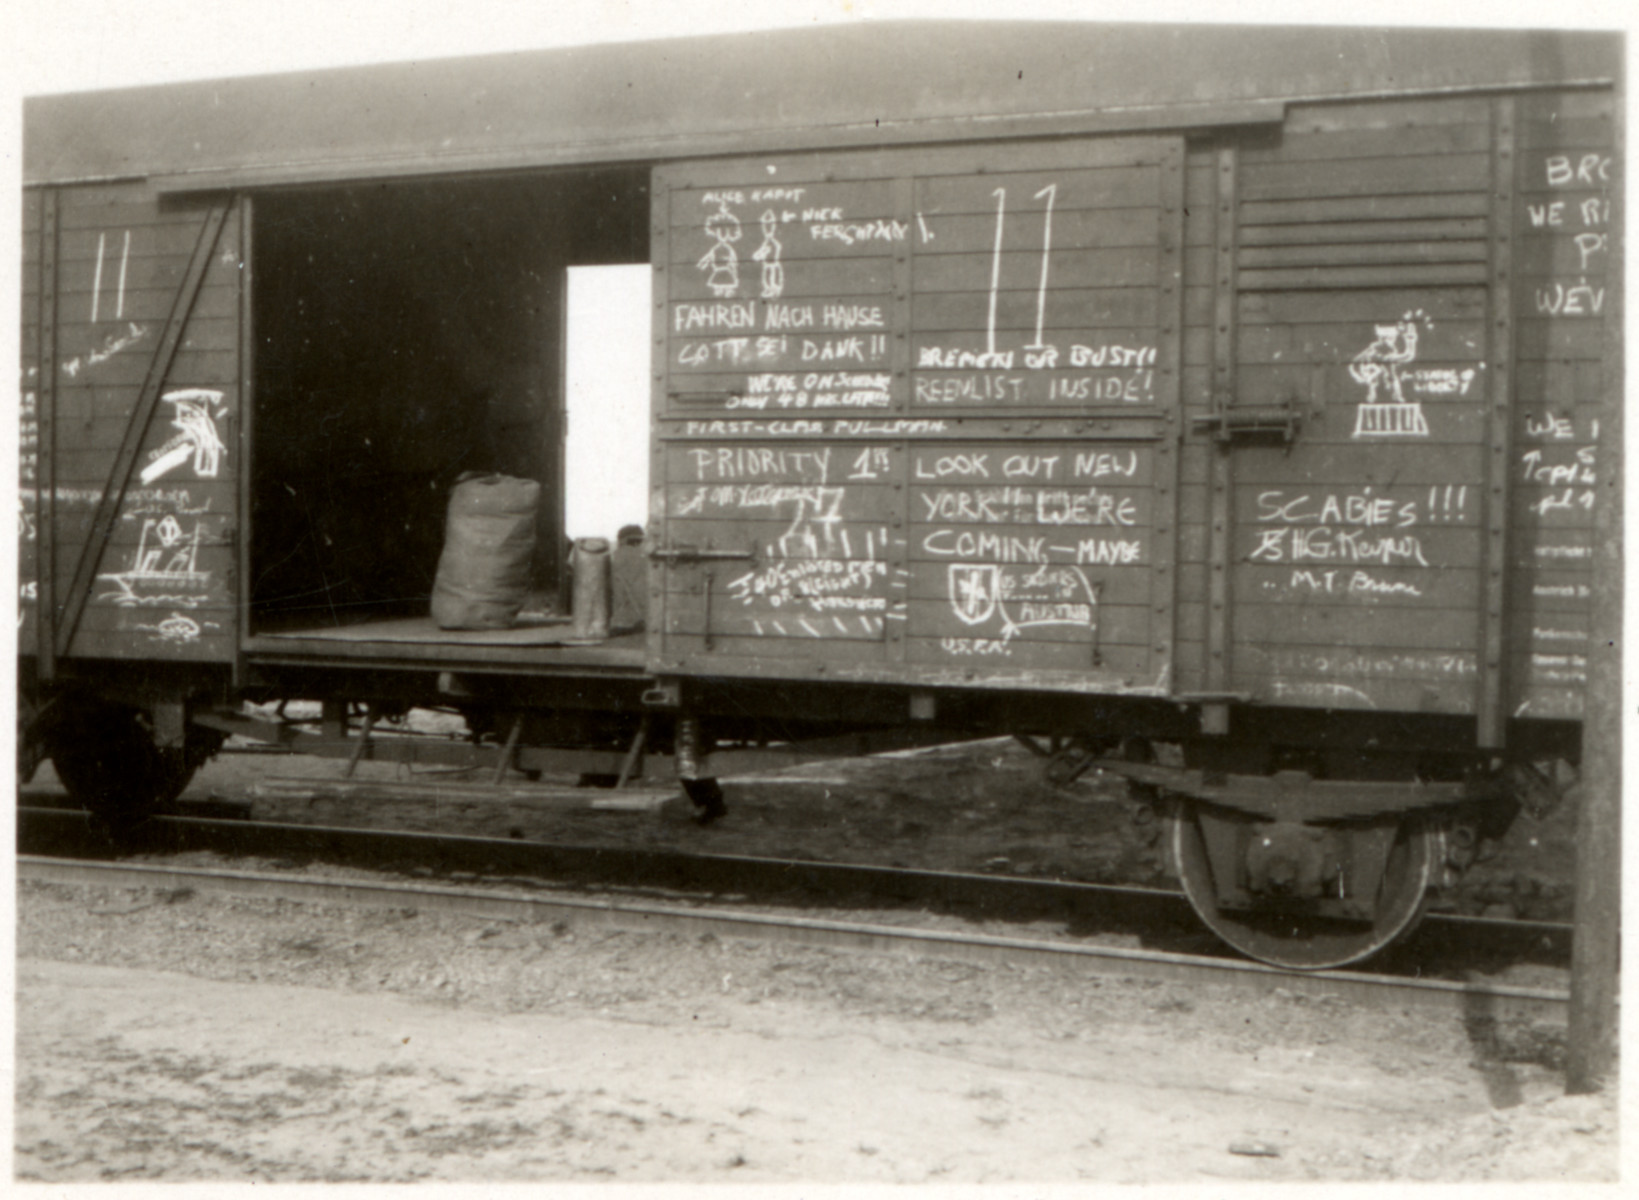 View of a cattle car used by American GIs and covered with their graffiti.